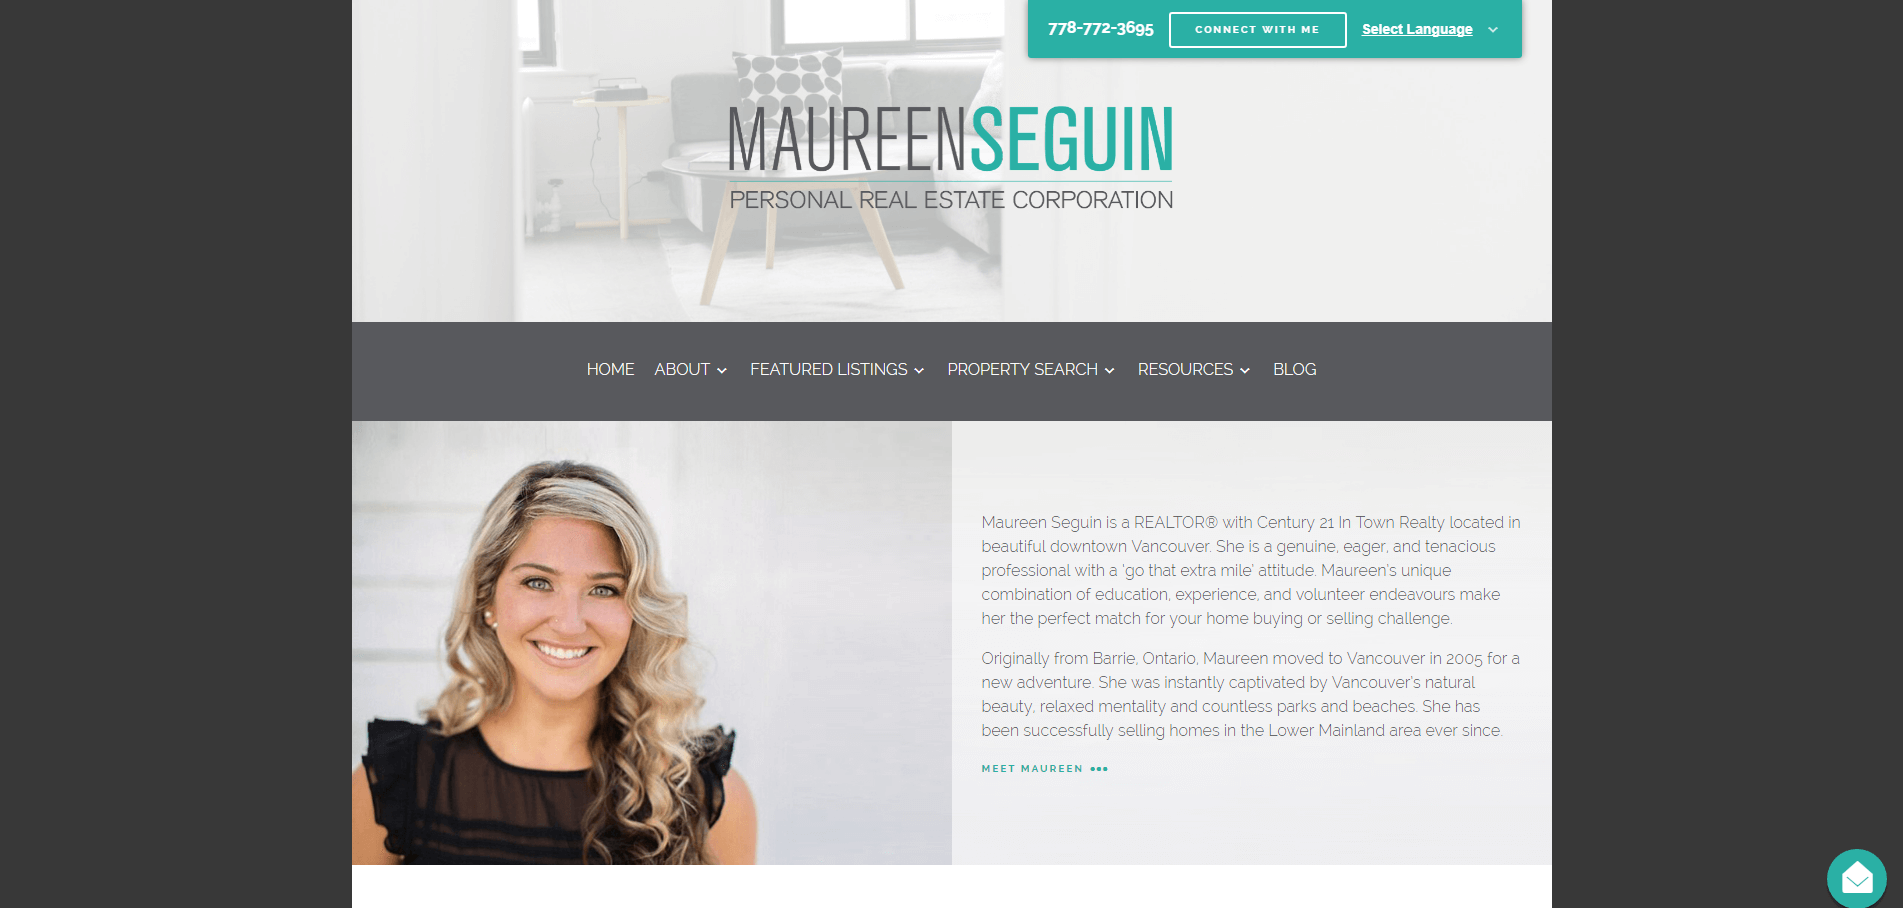  Awesome!  Each site is ranked 1-101 with a description and review.  Here's maureenseguin.com.  Guess who made #1! 